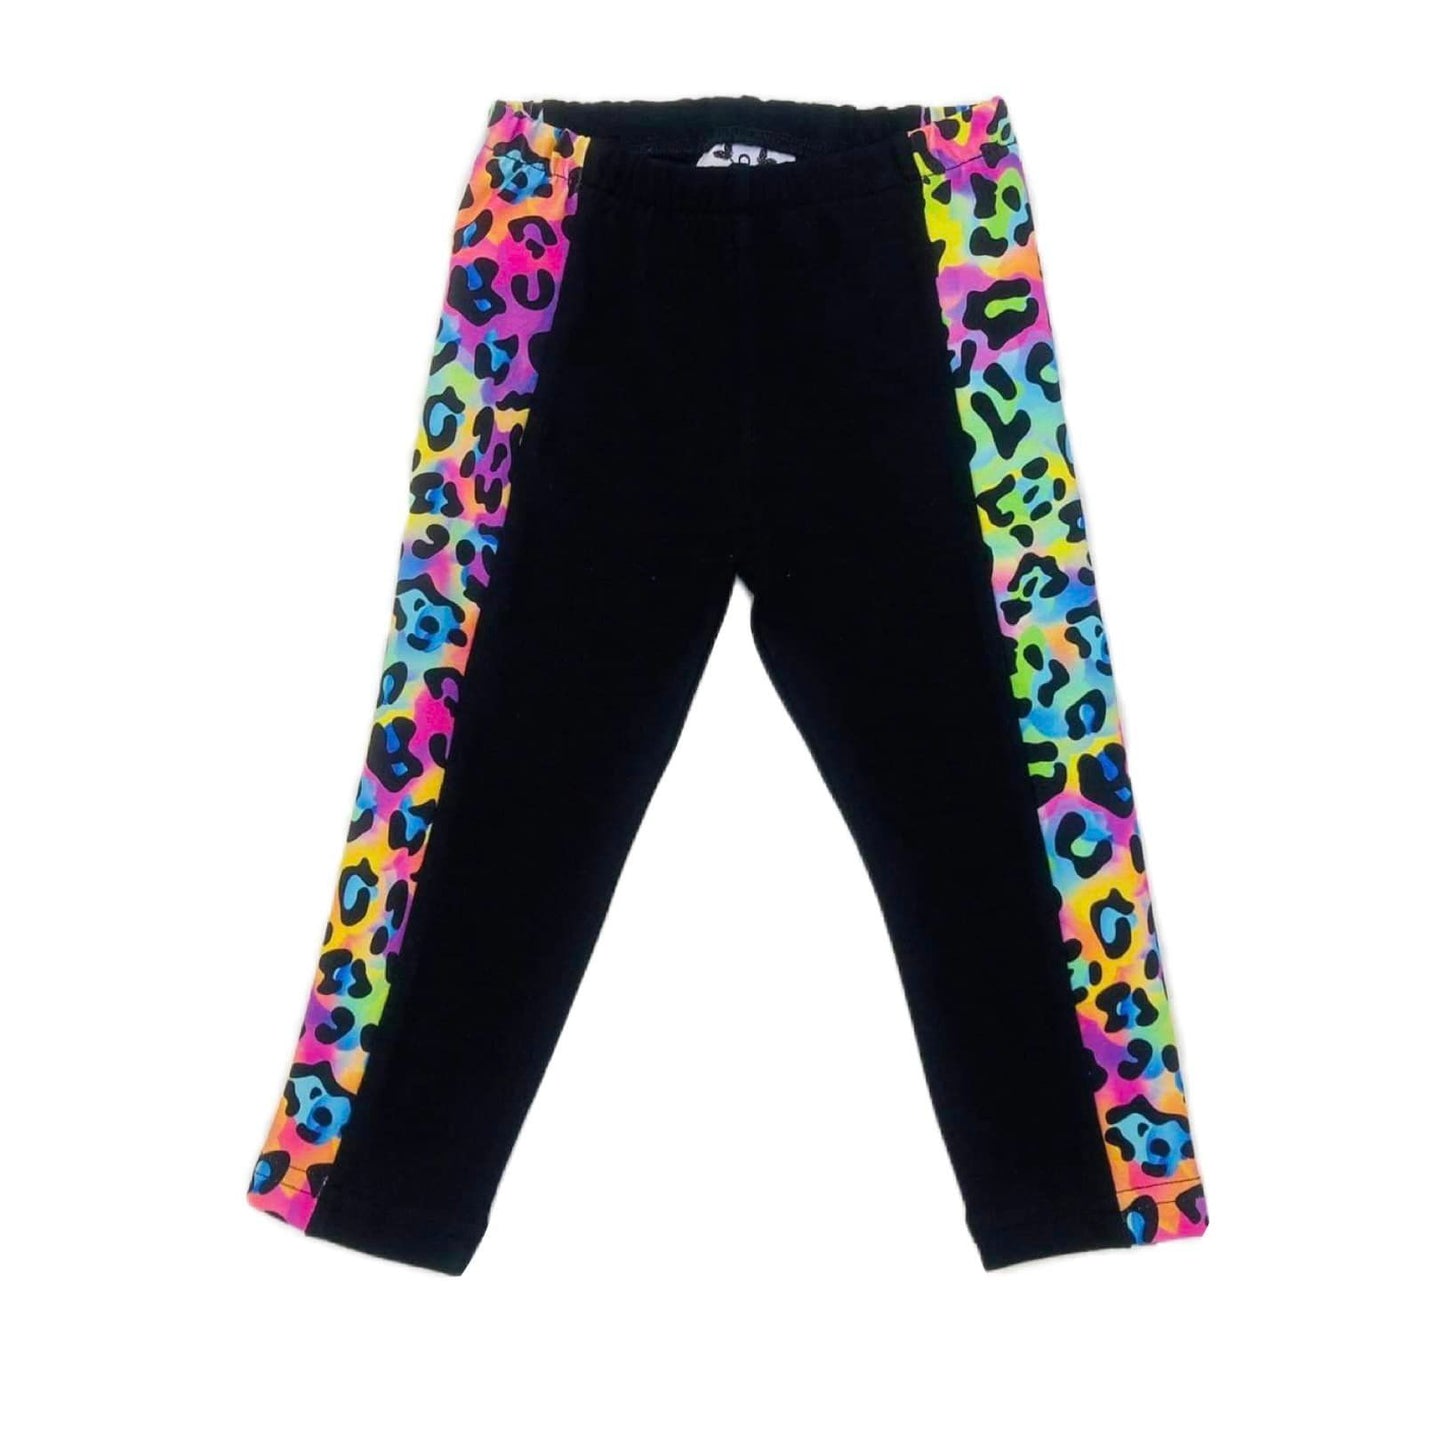 OH MY COLOURFUL LEOPARD SIDE LEGGINGS